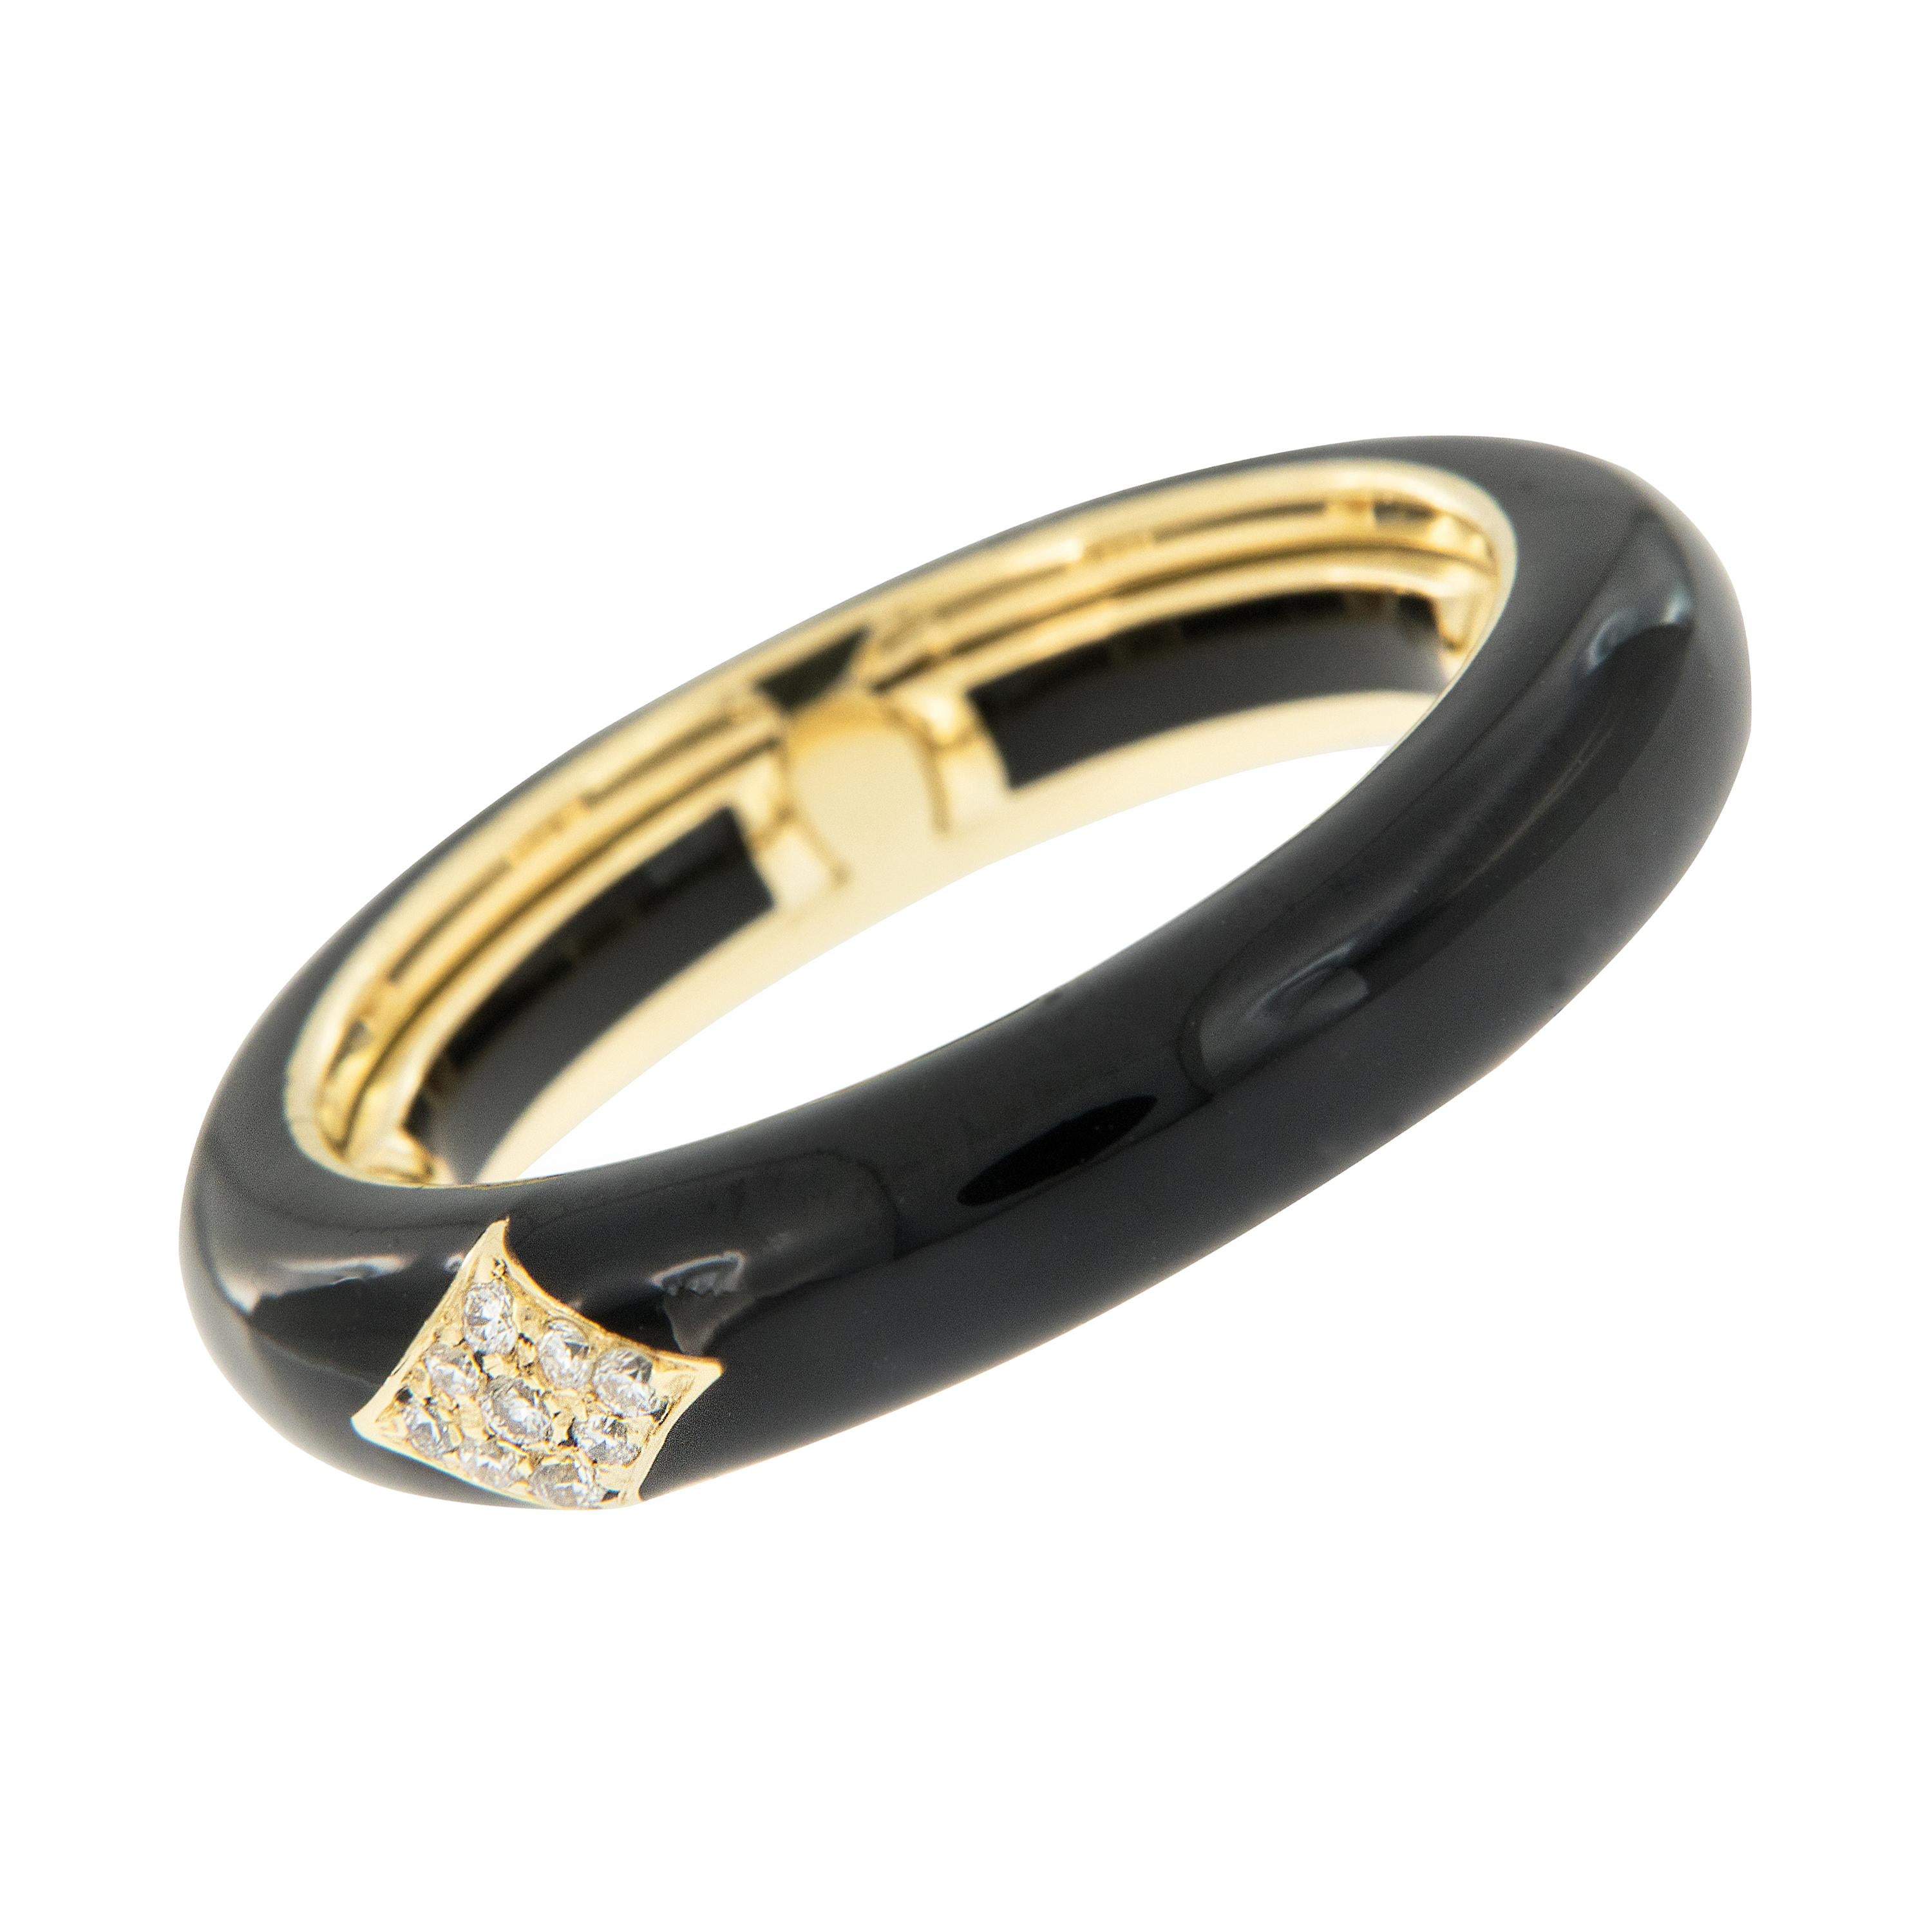 Bold, bright and beautiful! This contemporary enamel ring is hand-crafted in Italy for Campanelli & Pear. Ring is 18k yellow gold featuring a smooth enamel finish in rich black and accented with 0.07 Cttw pave' set diamonds in chevron. The ring